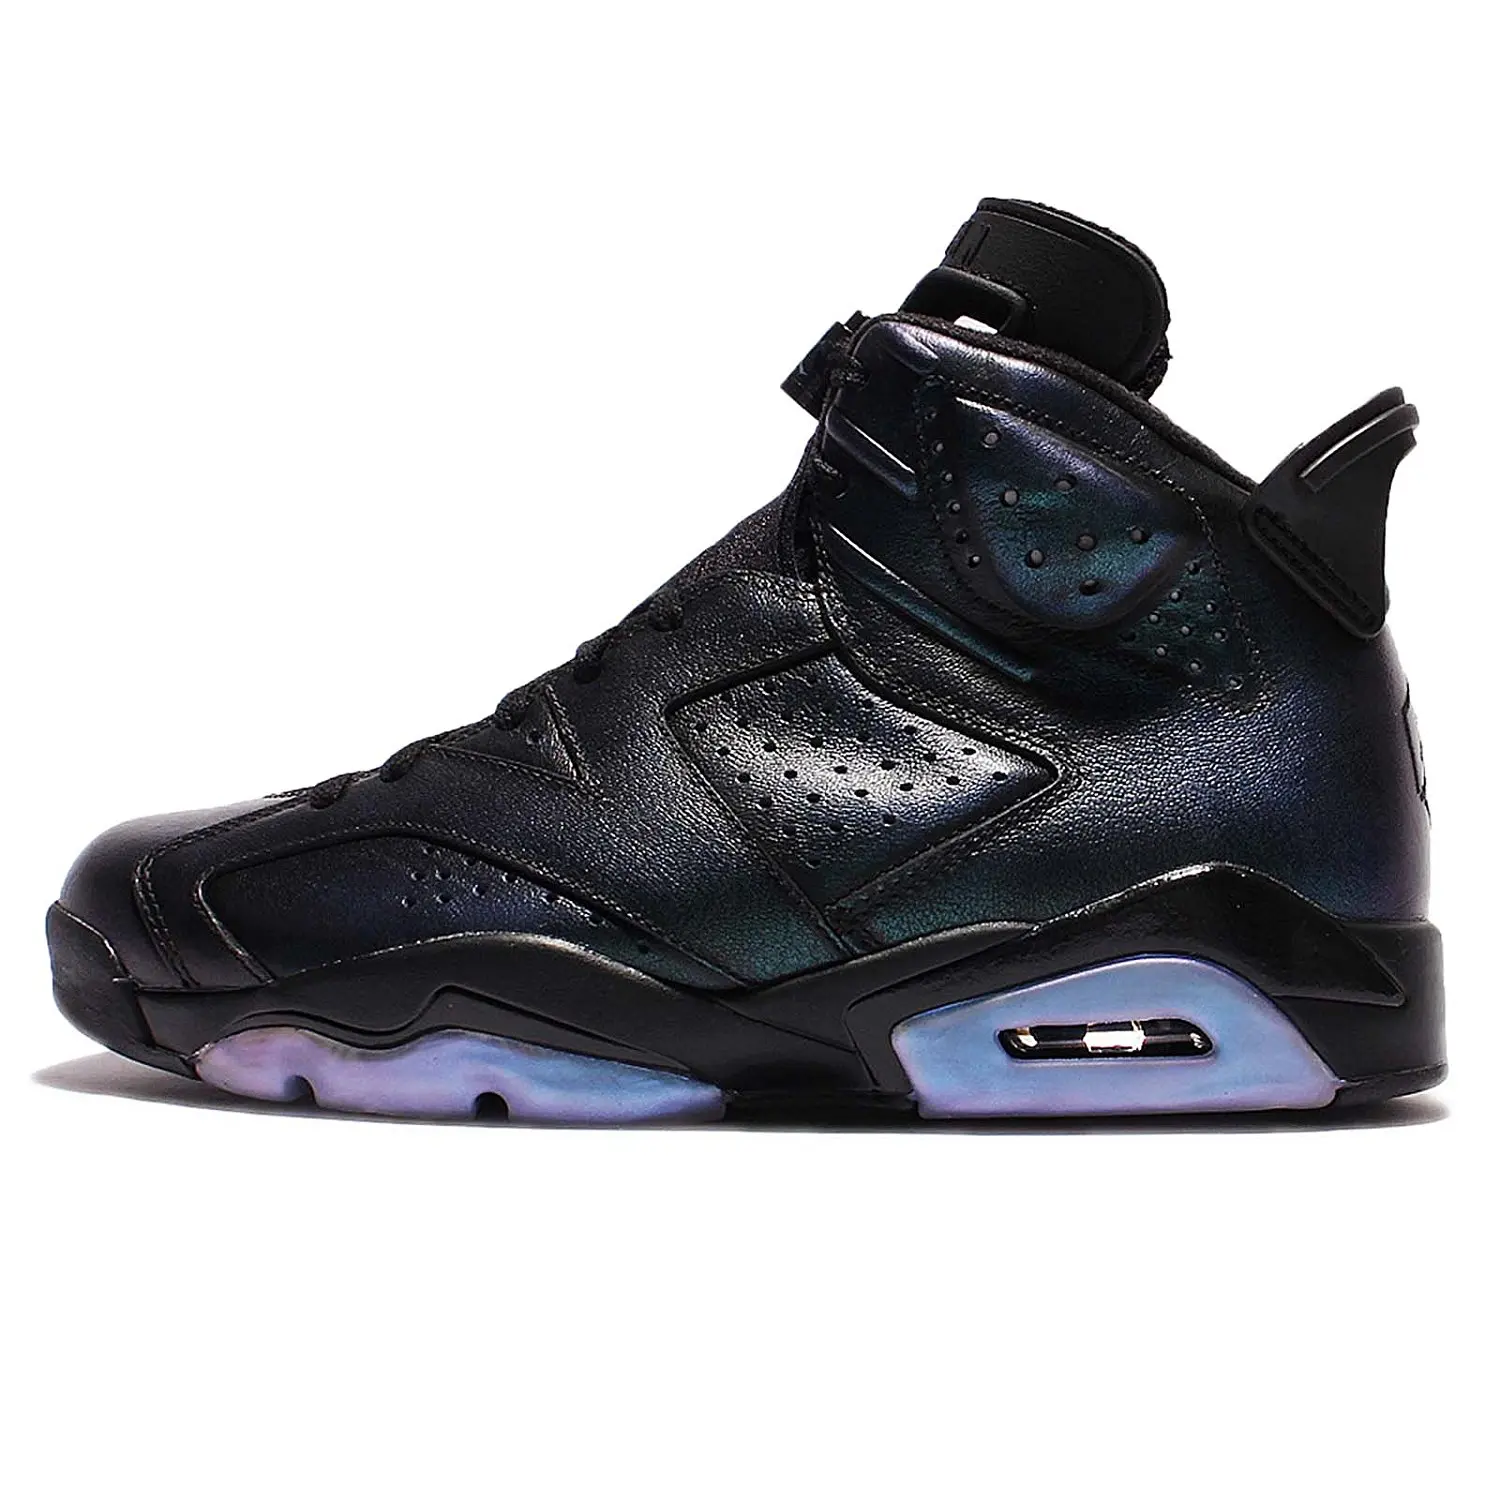 Buy Nike Air Jordan Retro 6 “All-Star” Cameleon Mens Basketball Shoes Size 15 in Cheap Price on ...